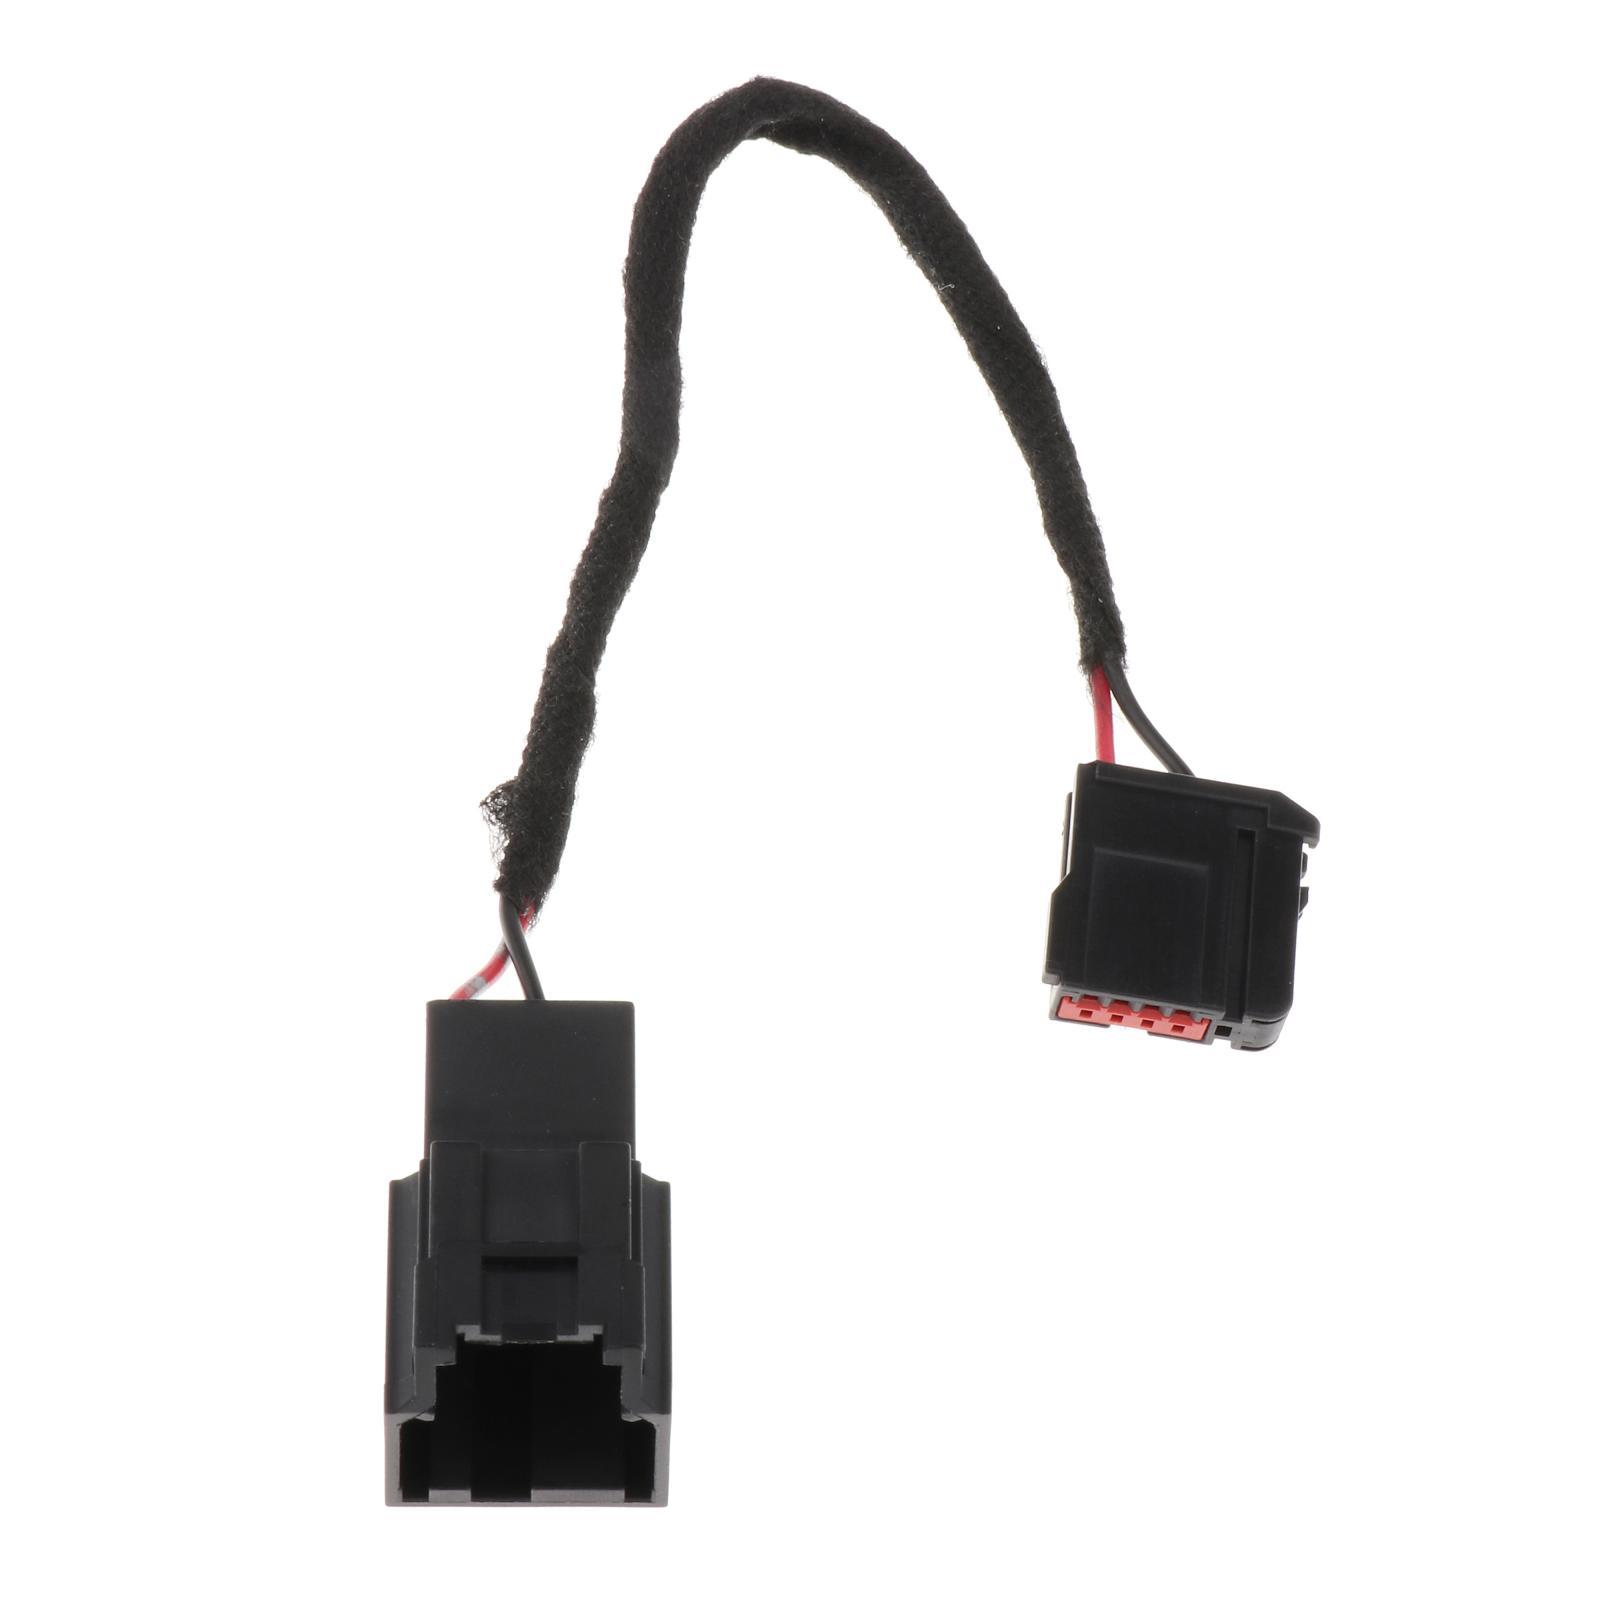 Wiring Adapter Cable GEN 1 for Ford SYNC 2 To SYNC 3 Retrofit USB Media HUB